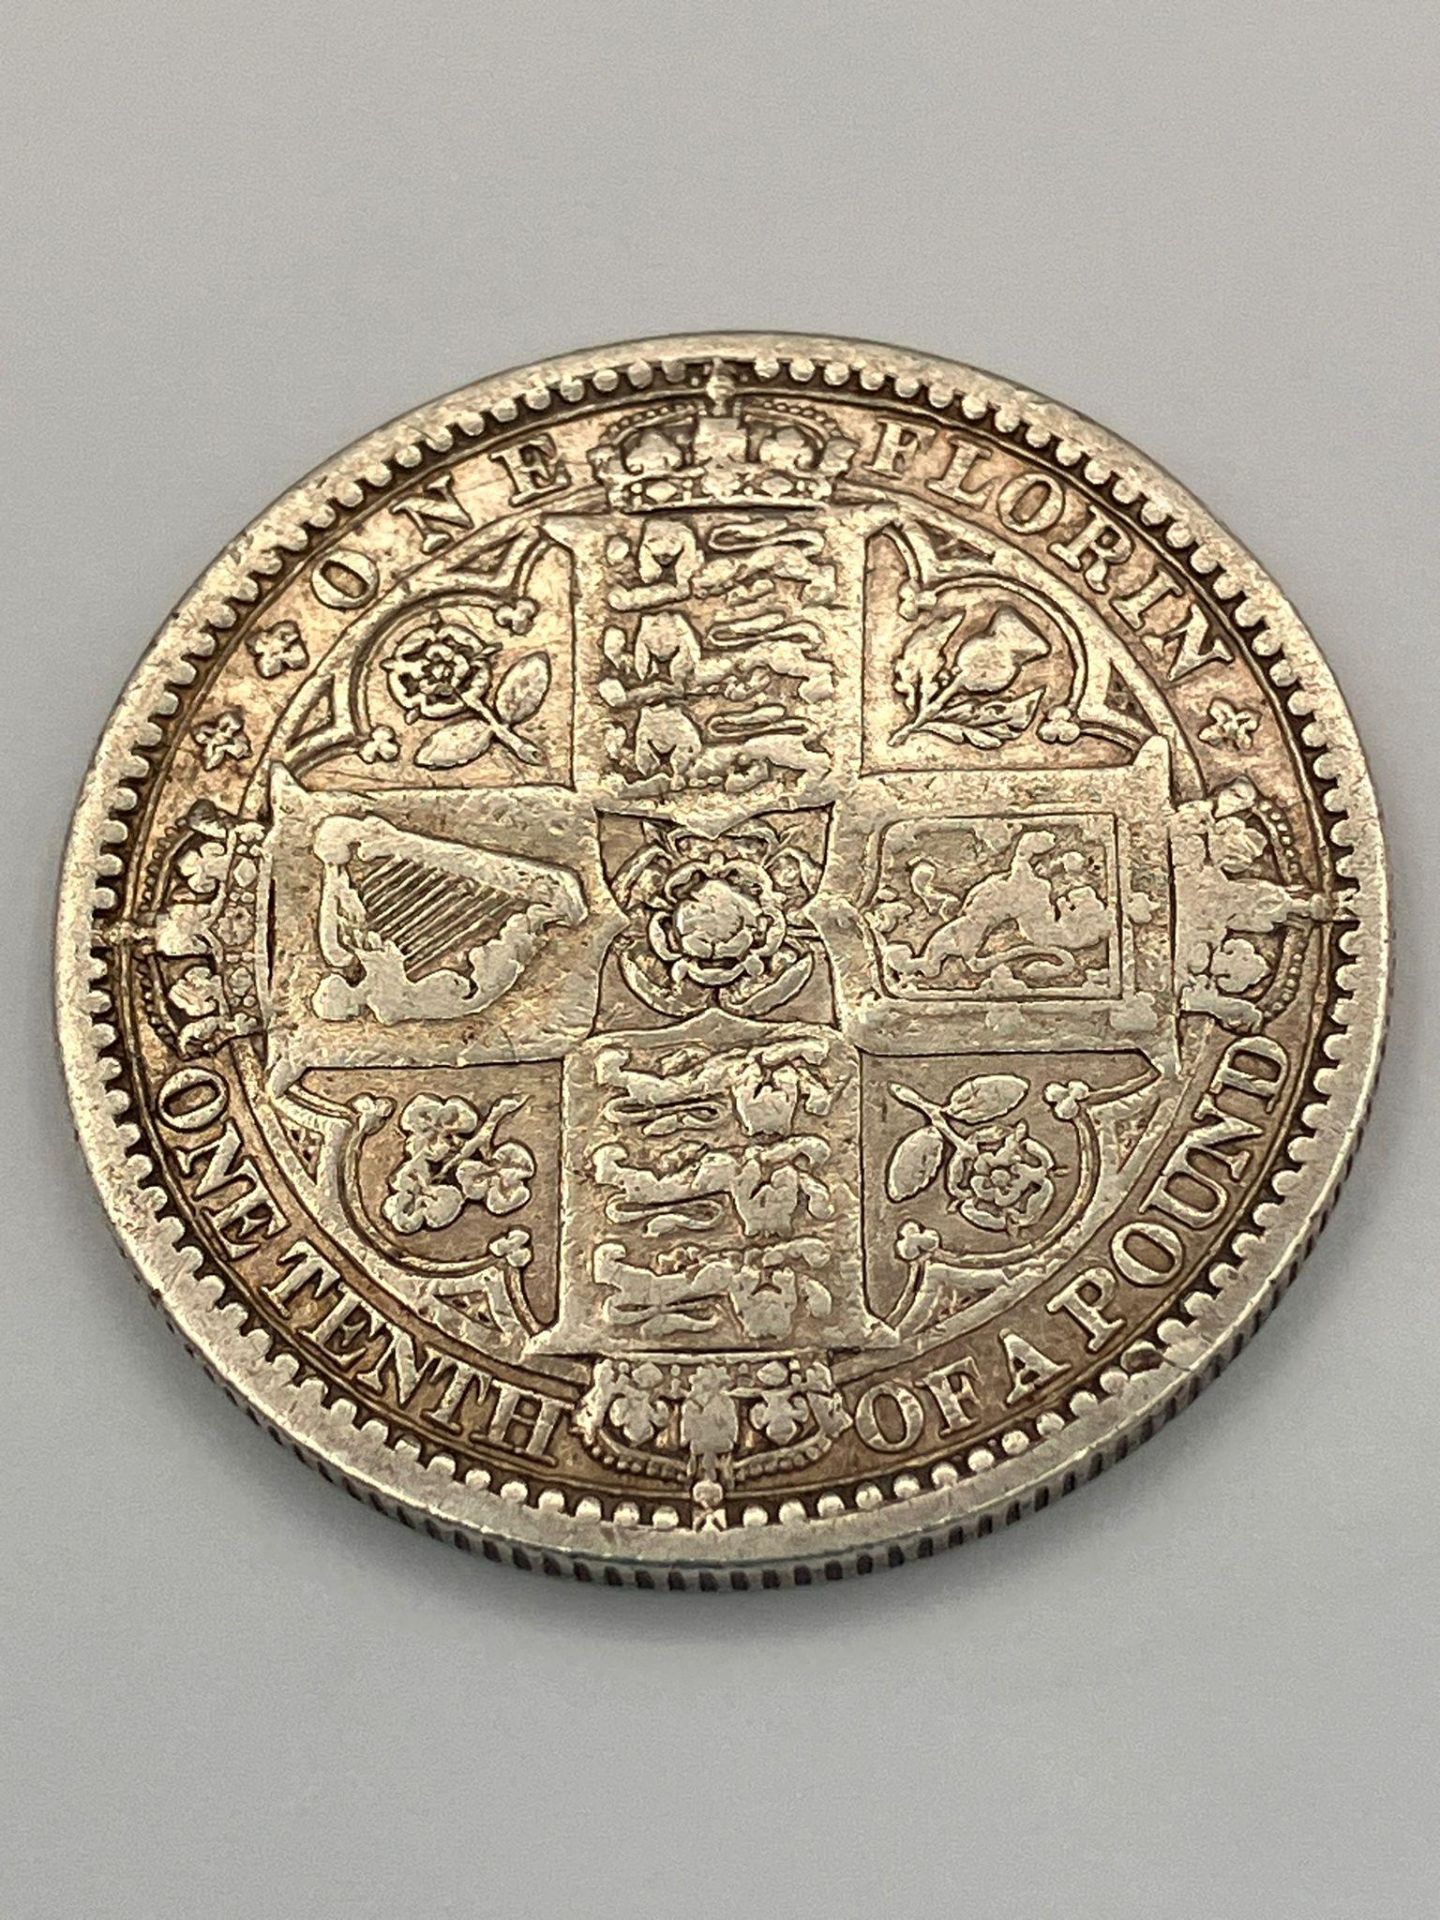 1849 SILVER GOTHIC FLORIN. Very fine condition. This is the infamous coin missing the words Del